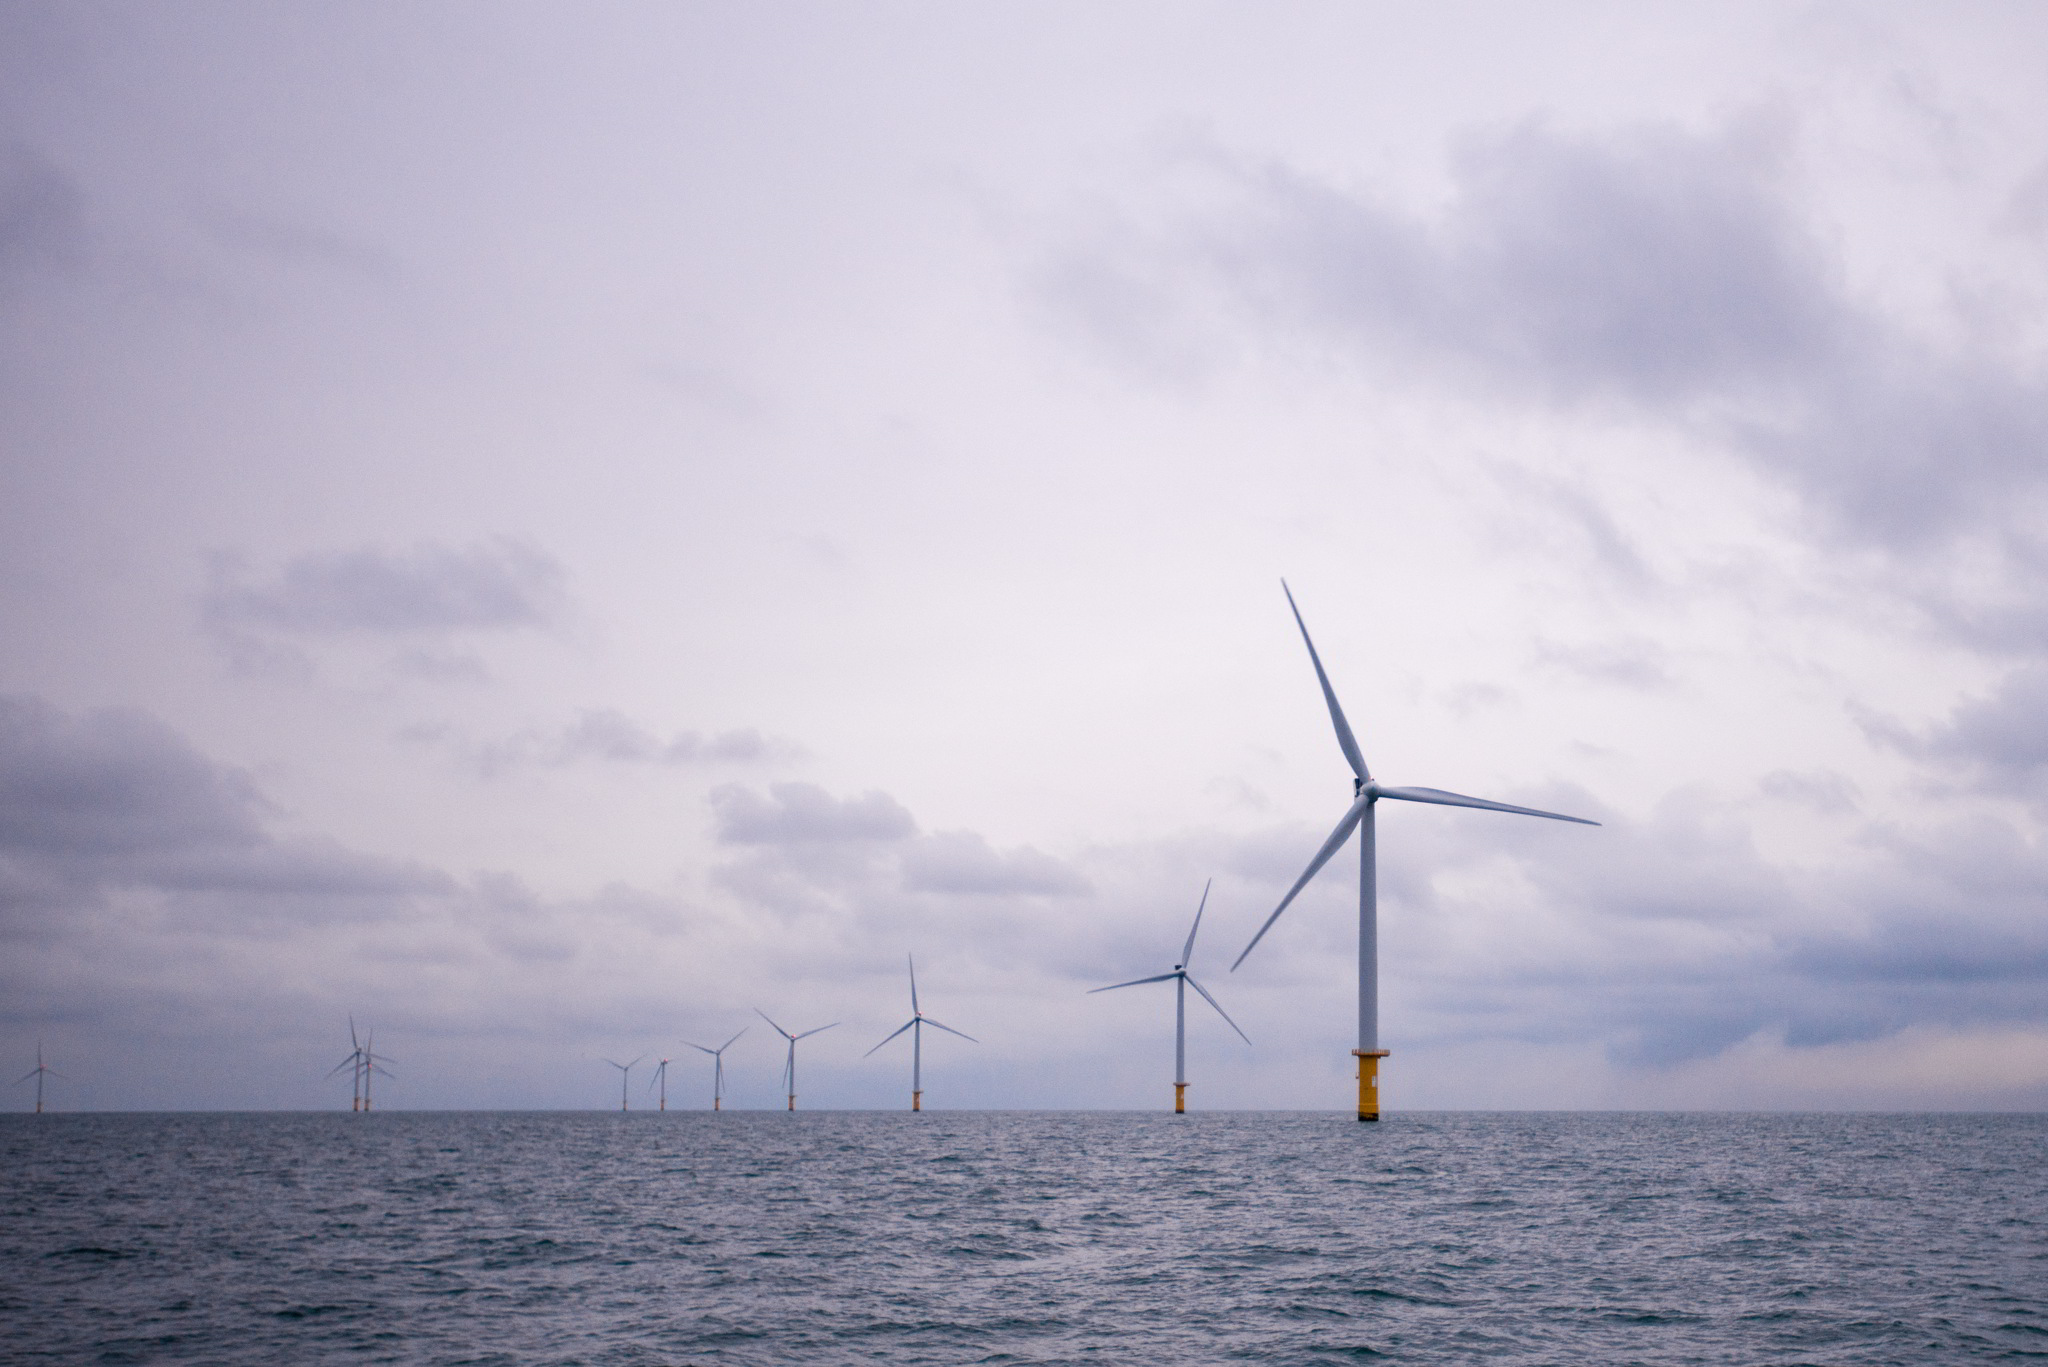 A photo of an offshore wind farm